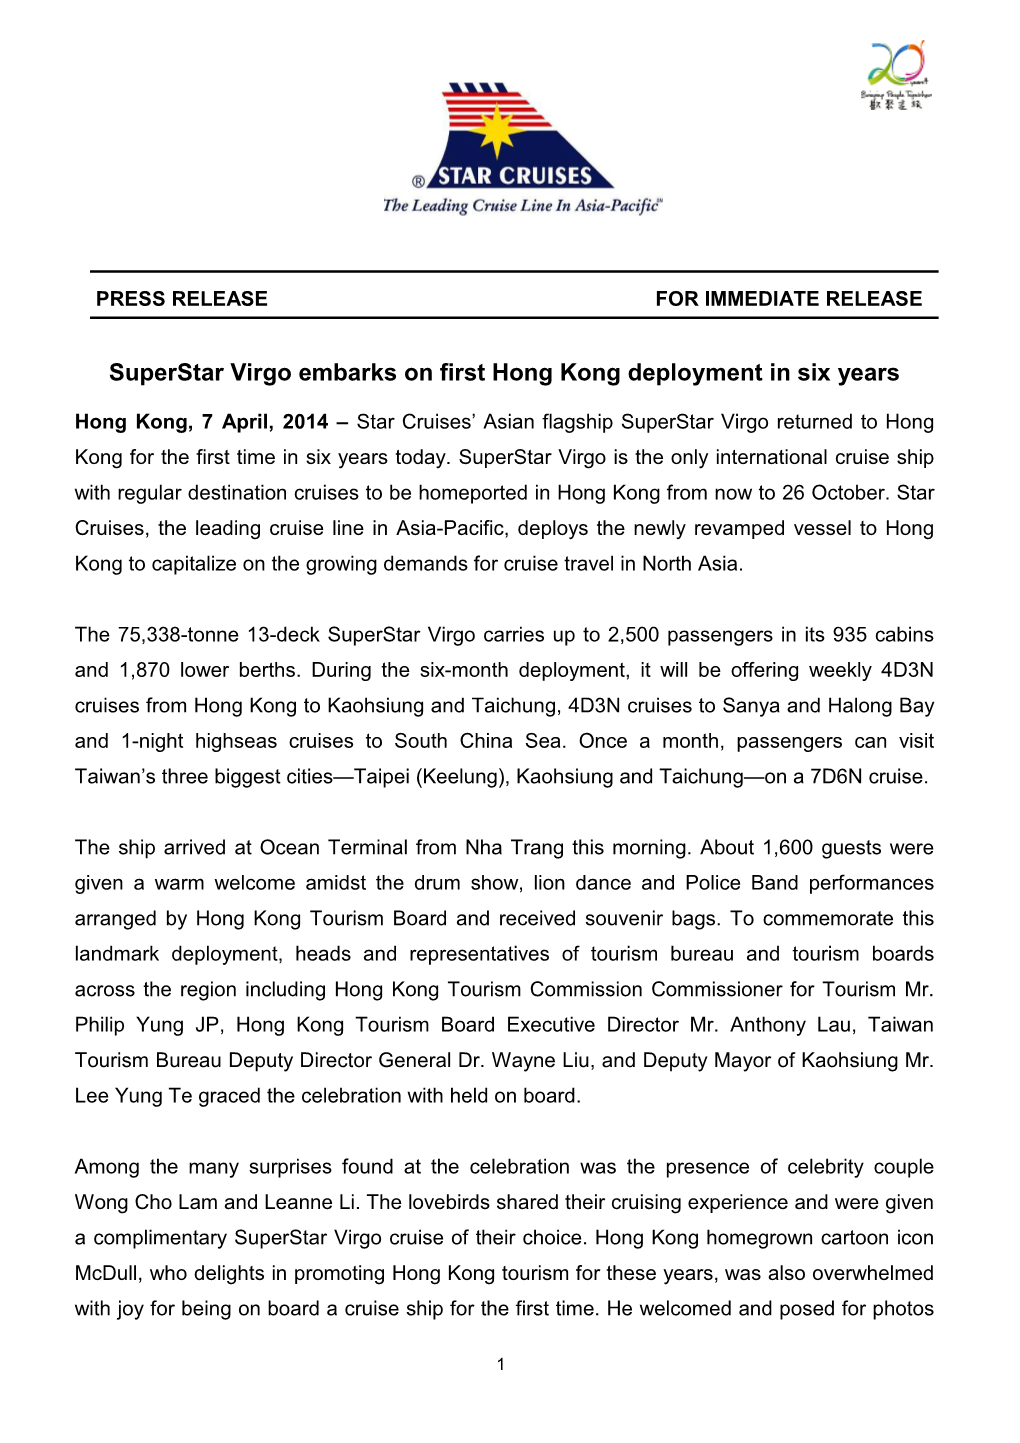 Genting Hong Kong Sponsors China Professional Golf Championship Tour for the Second Year